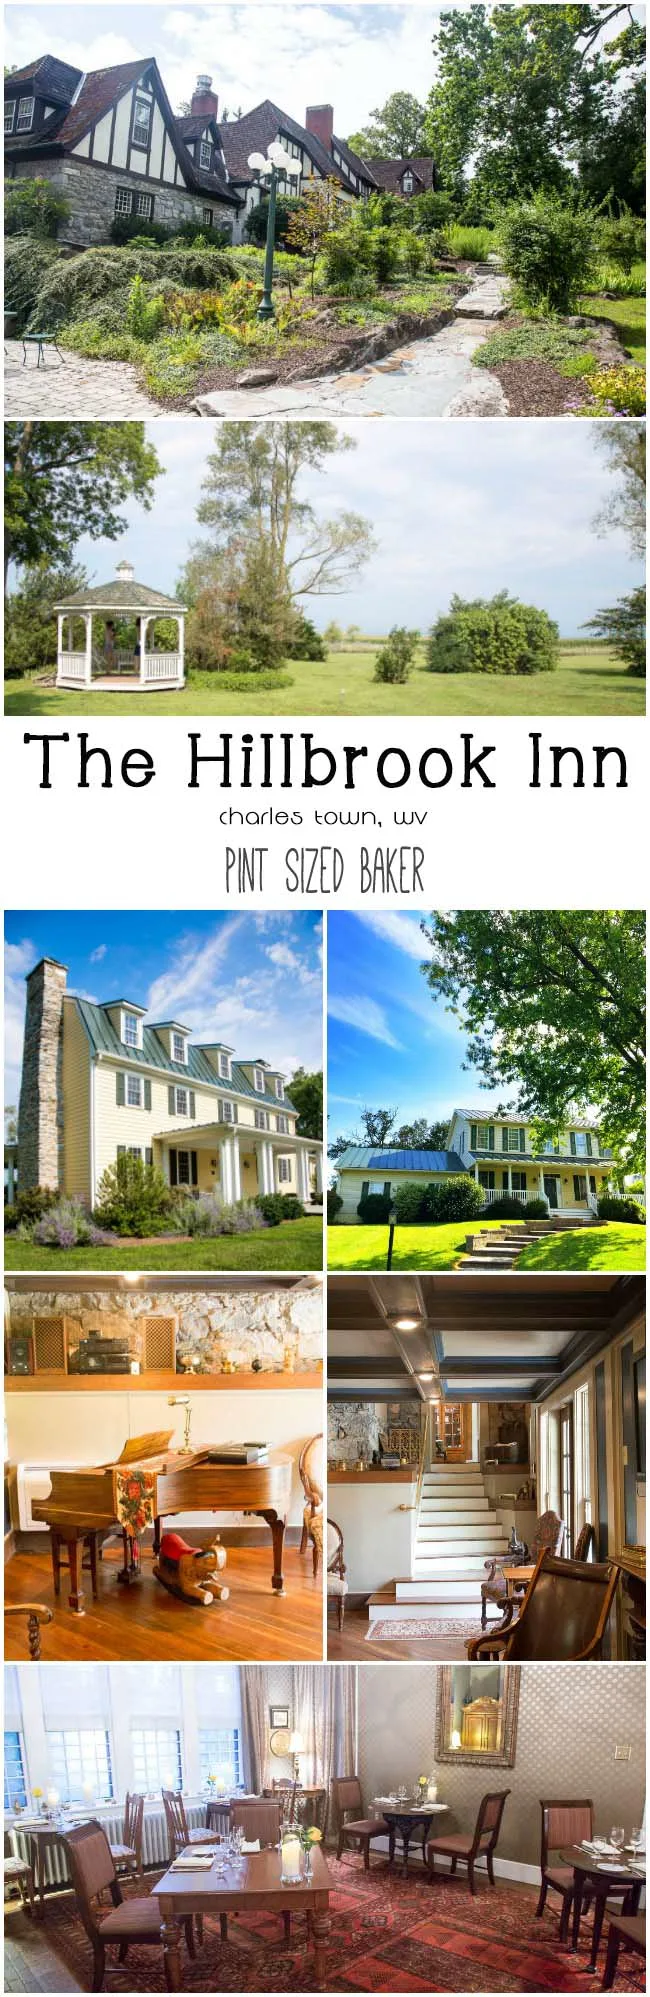 Spend the weekend in the West Virginia panhandle at one of the thee properties at the Hillbrook Inn. It's a sweet destination!